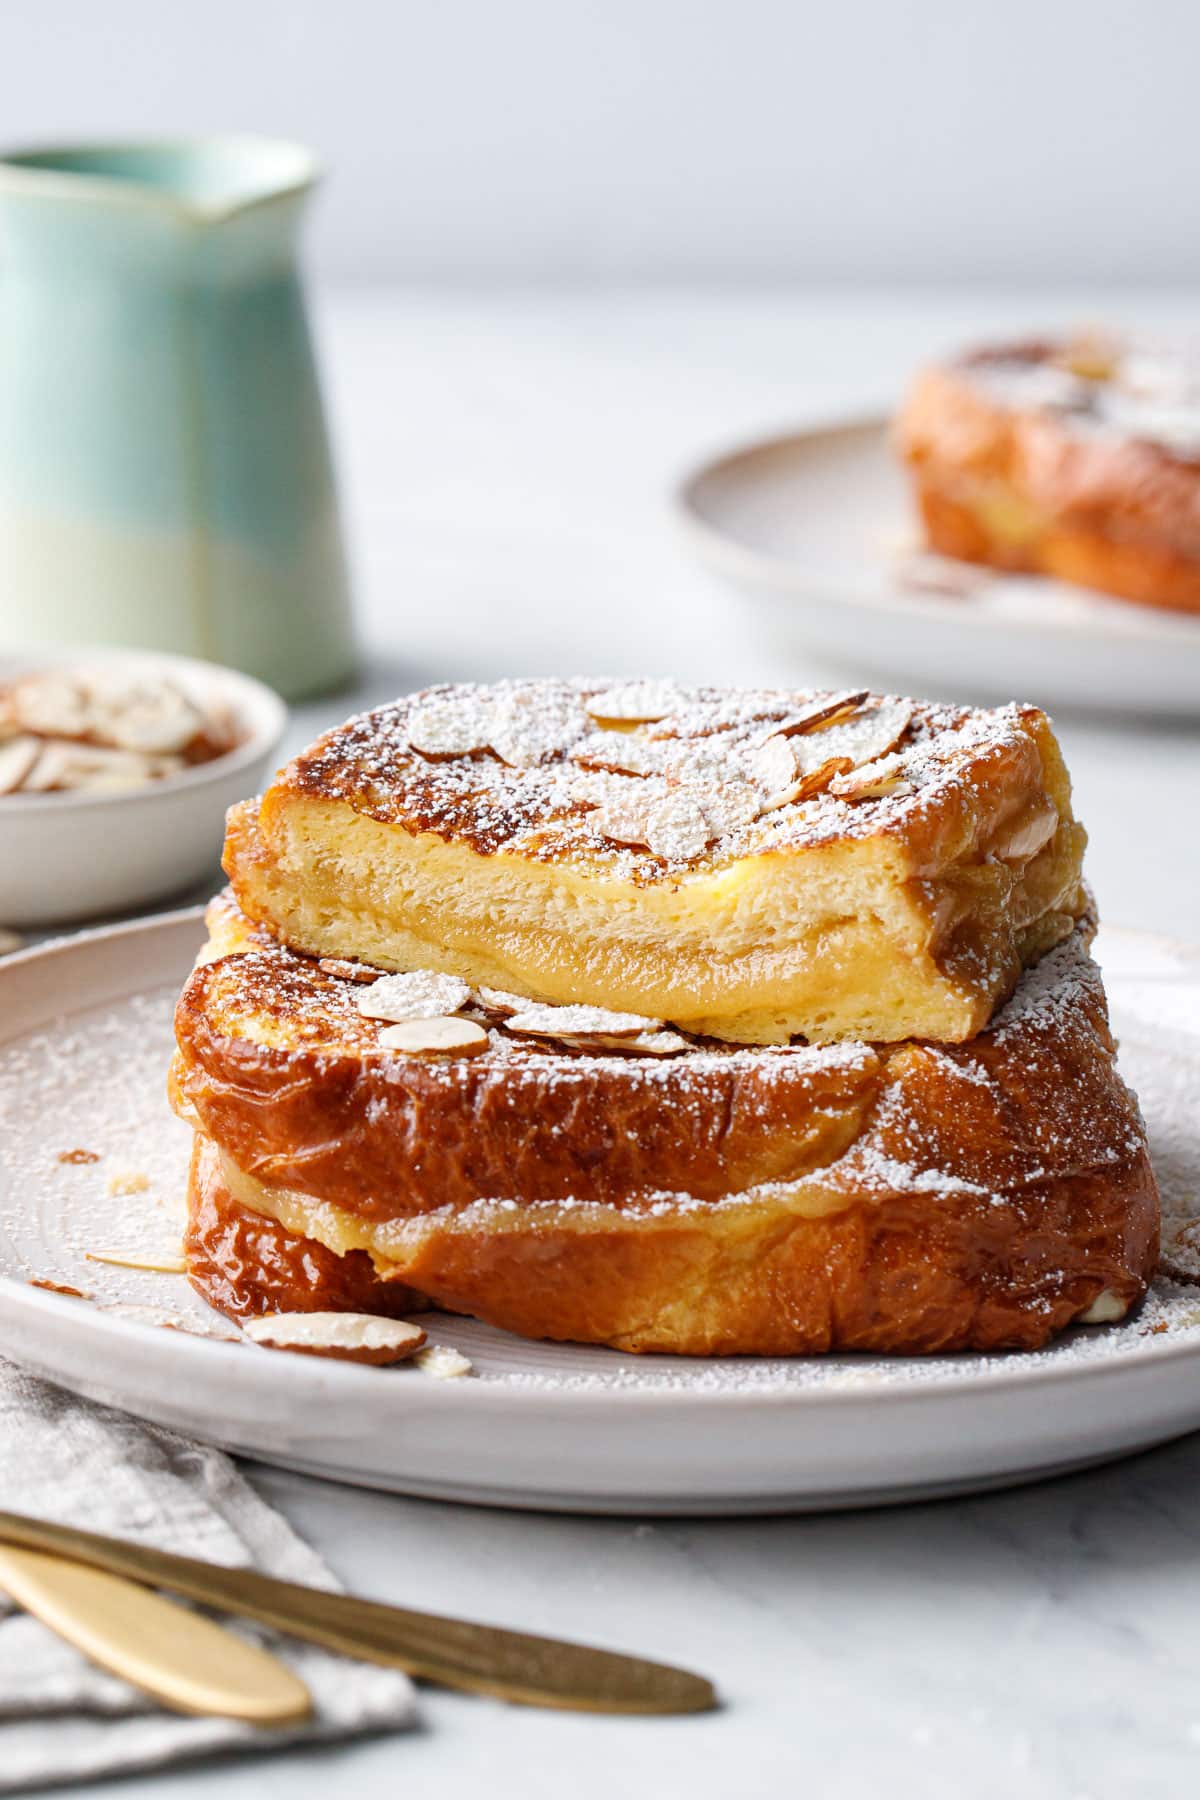 Stacked Marzipan-Stuffed French Toast on a white plate, one piece cut in half to show the gooey almond filling.